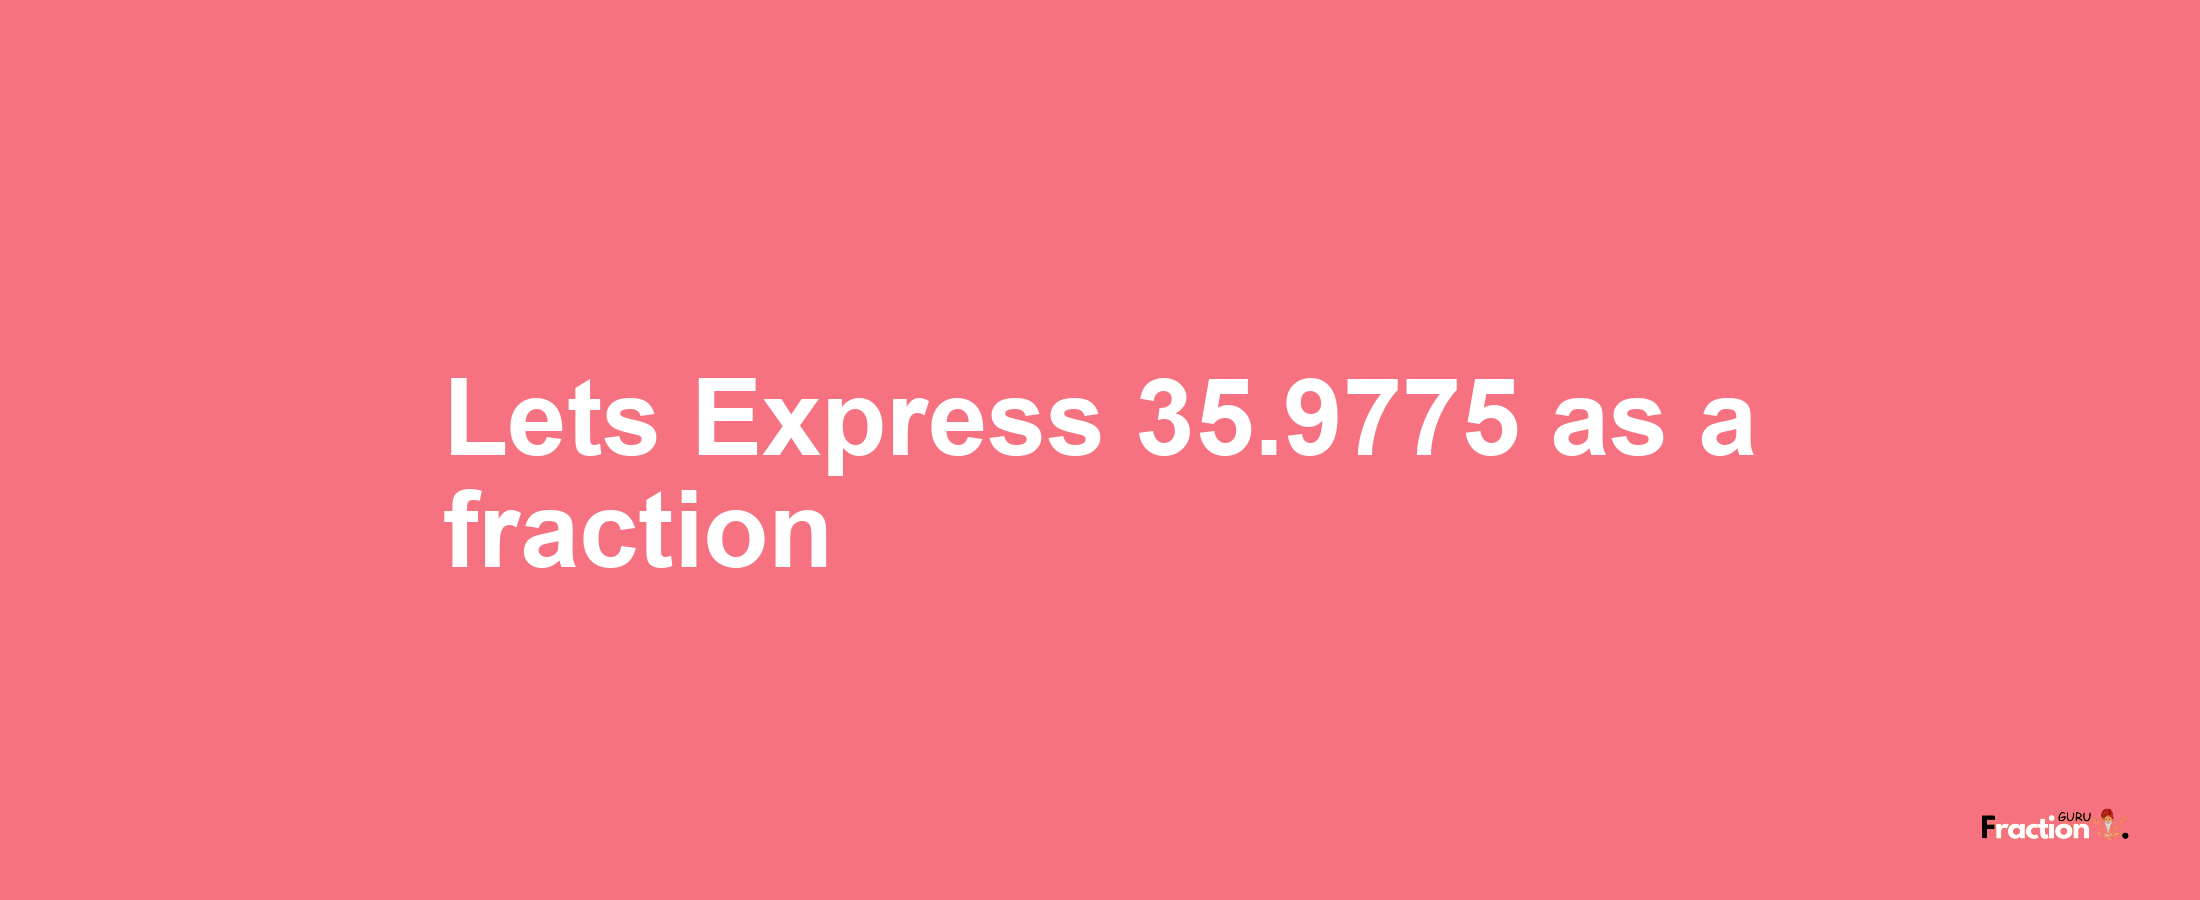 Lets Express 35.9775 as afraction